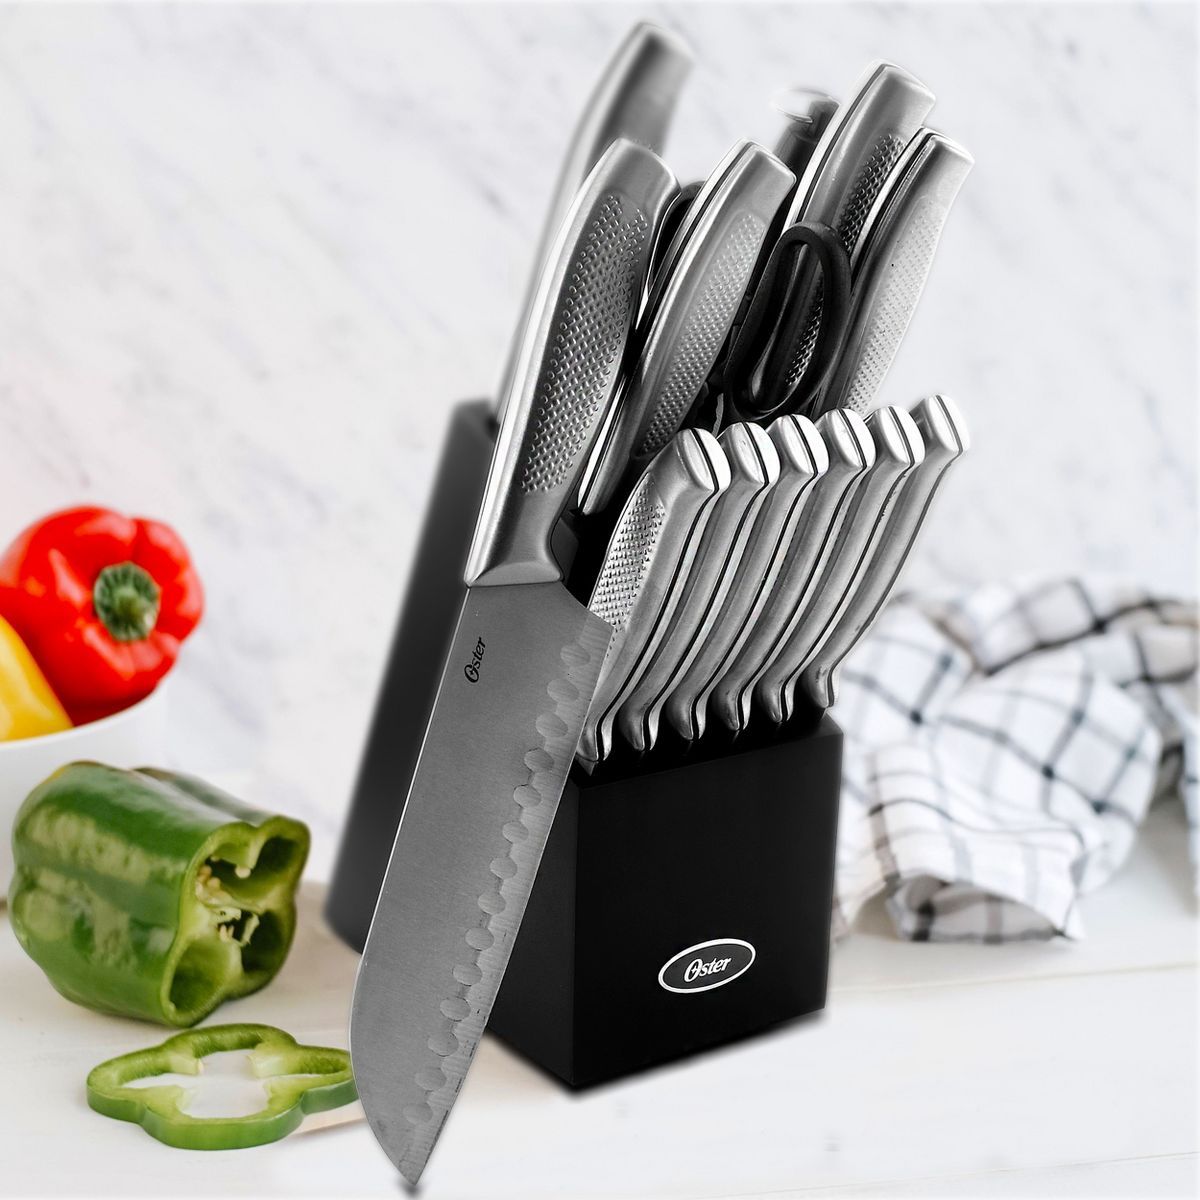 Oster Edgefield 14 Piece Stainless Steel Cutlery Knife Set with Black Knife Block | Target